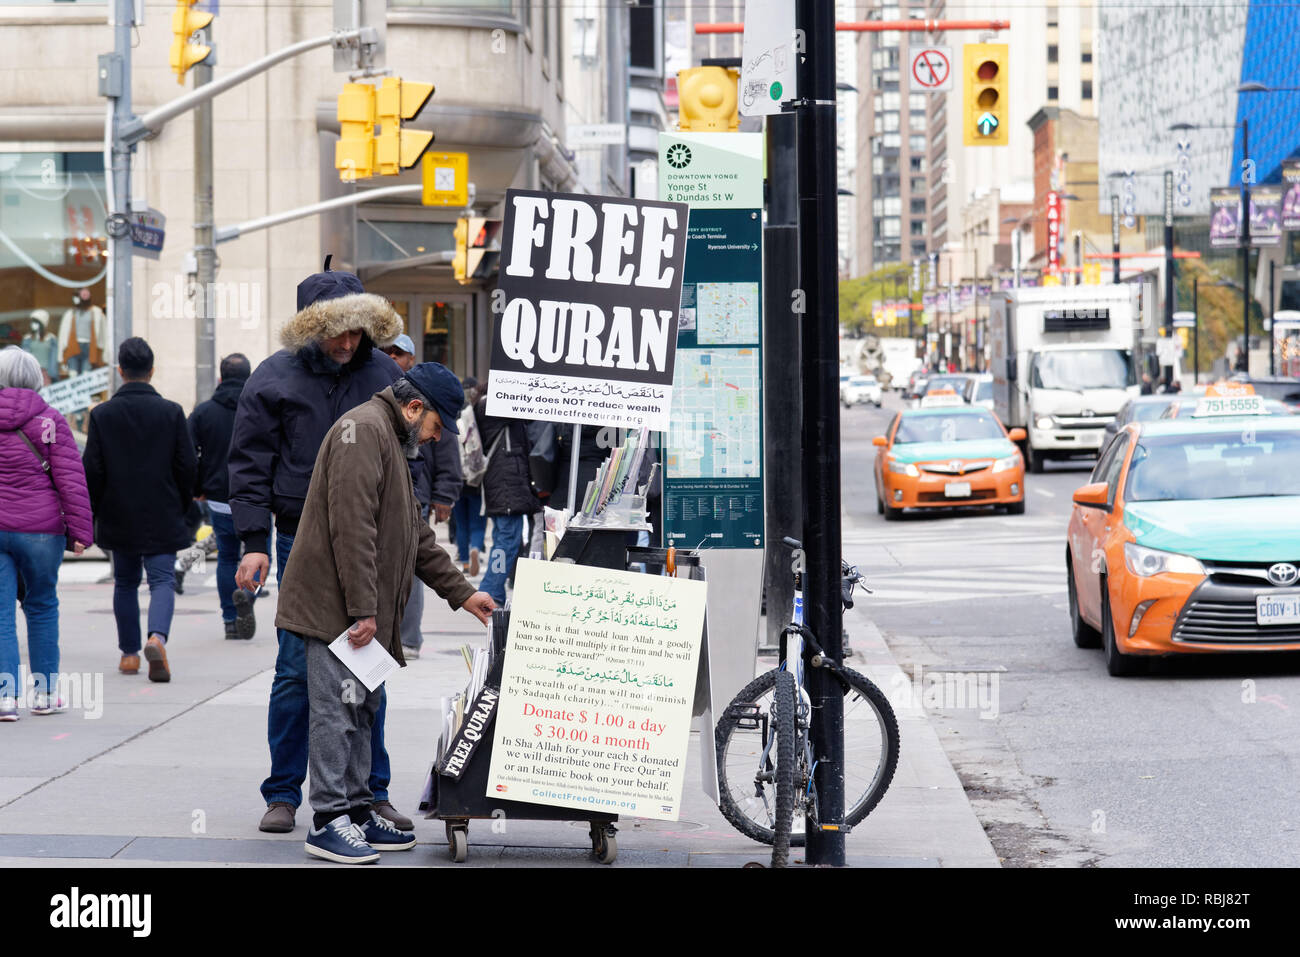 A muslim man at a street stand giving away free copies of the Koran, Toronto, Canada Stock Photo